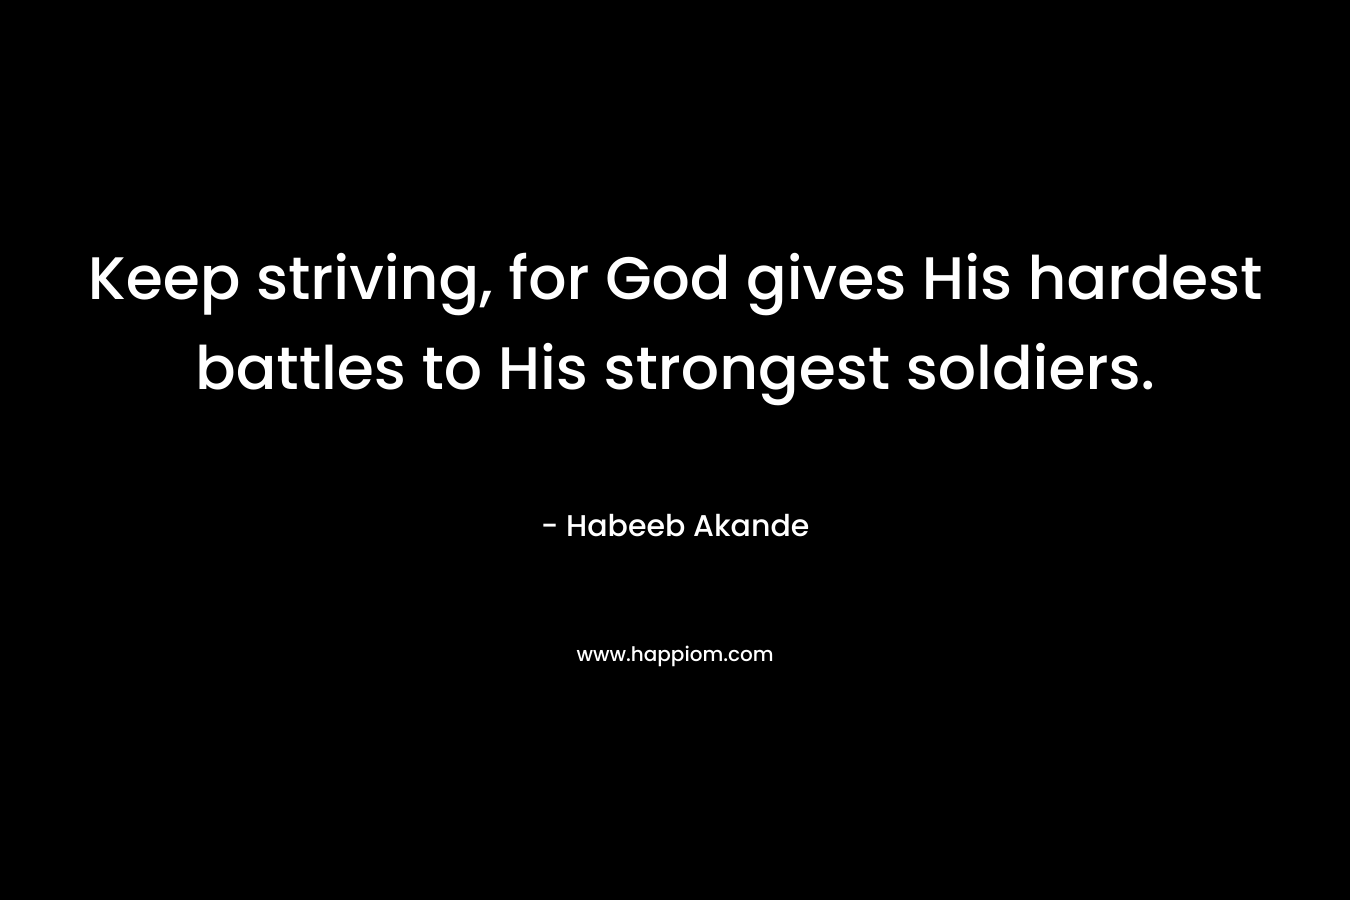 Keep striving, for God gives His hardest battles to His strongest soldiers.